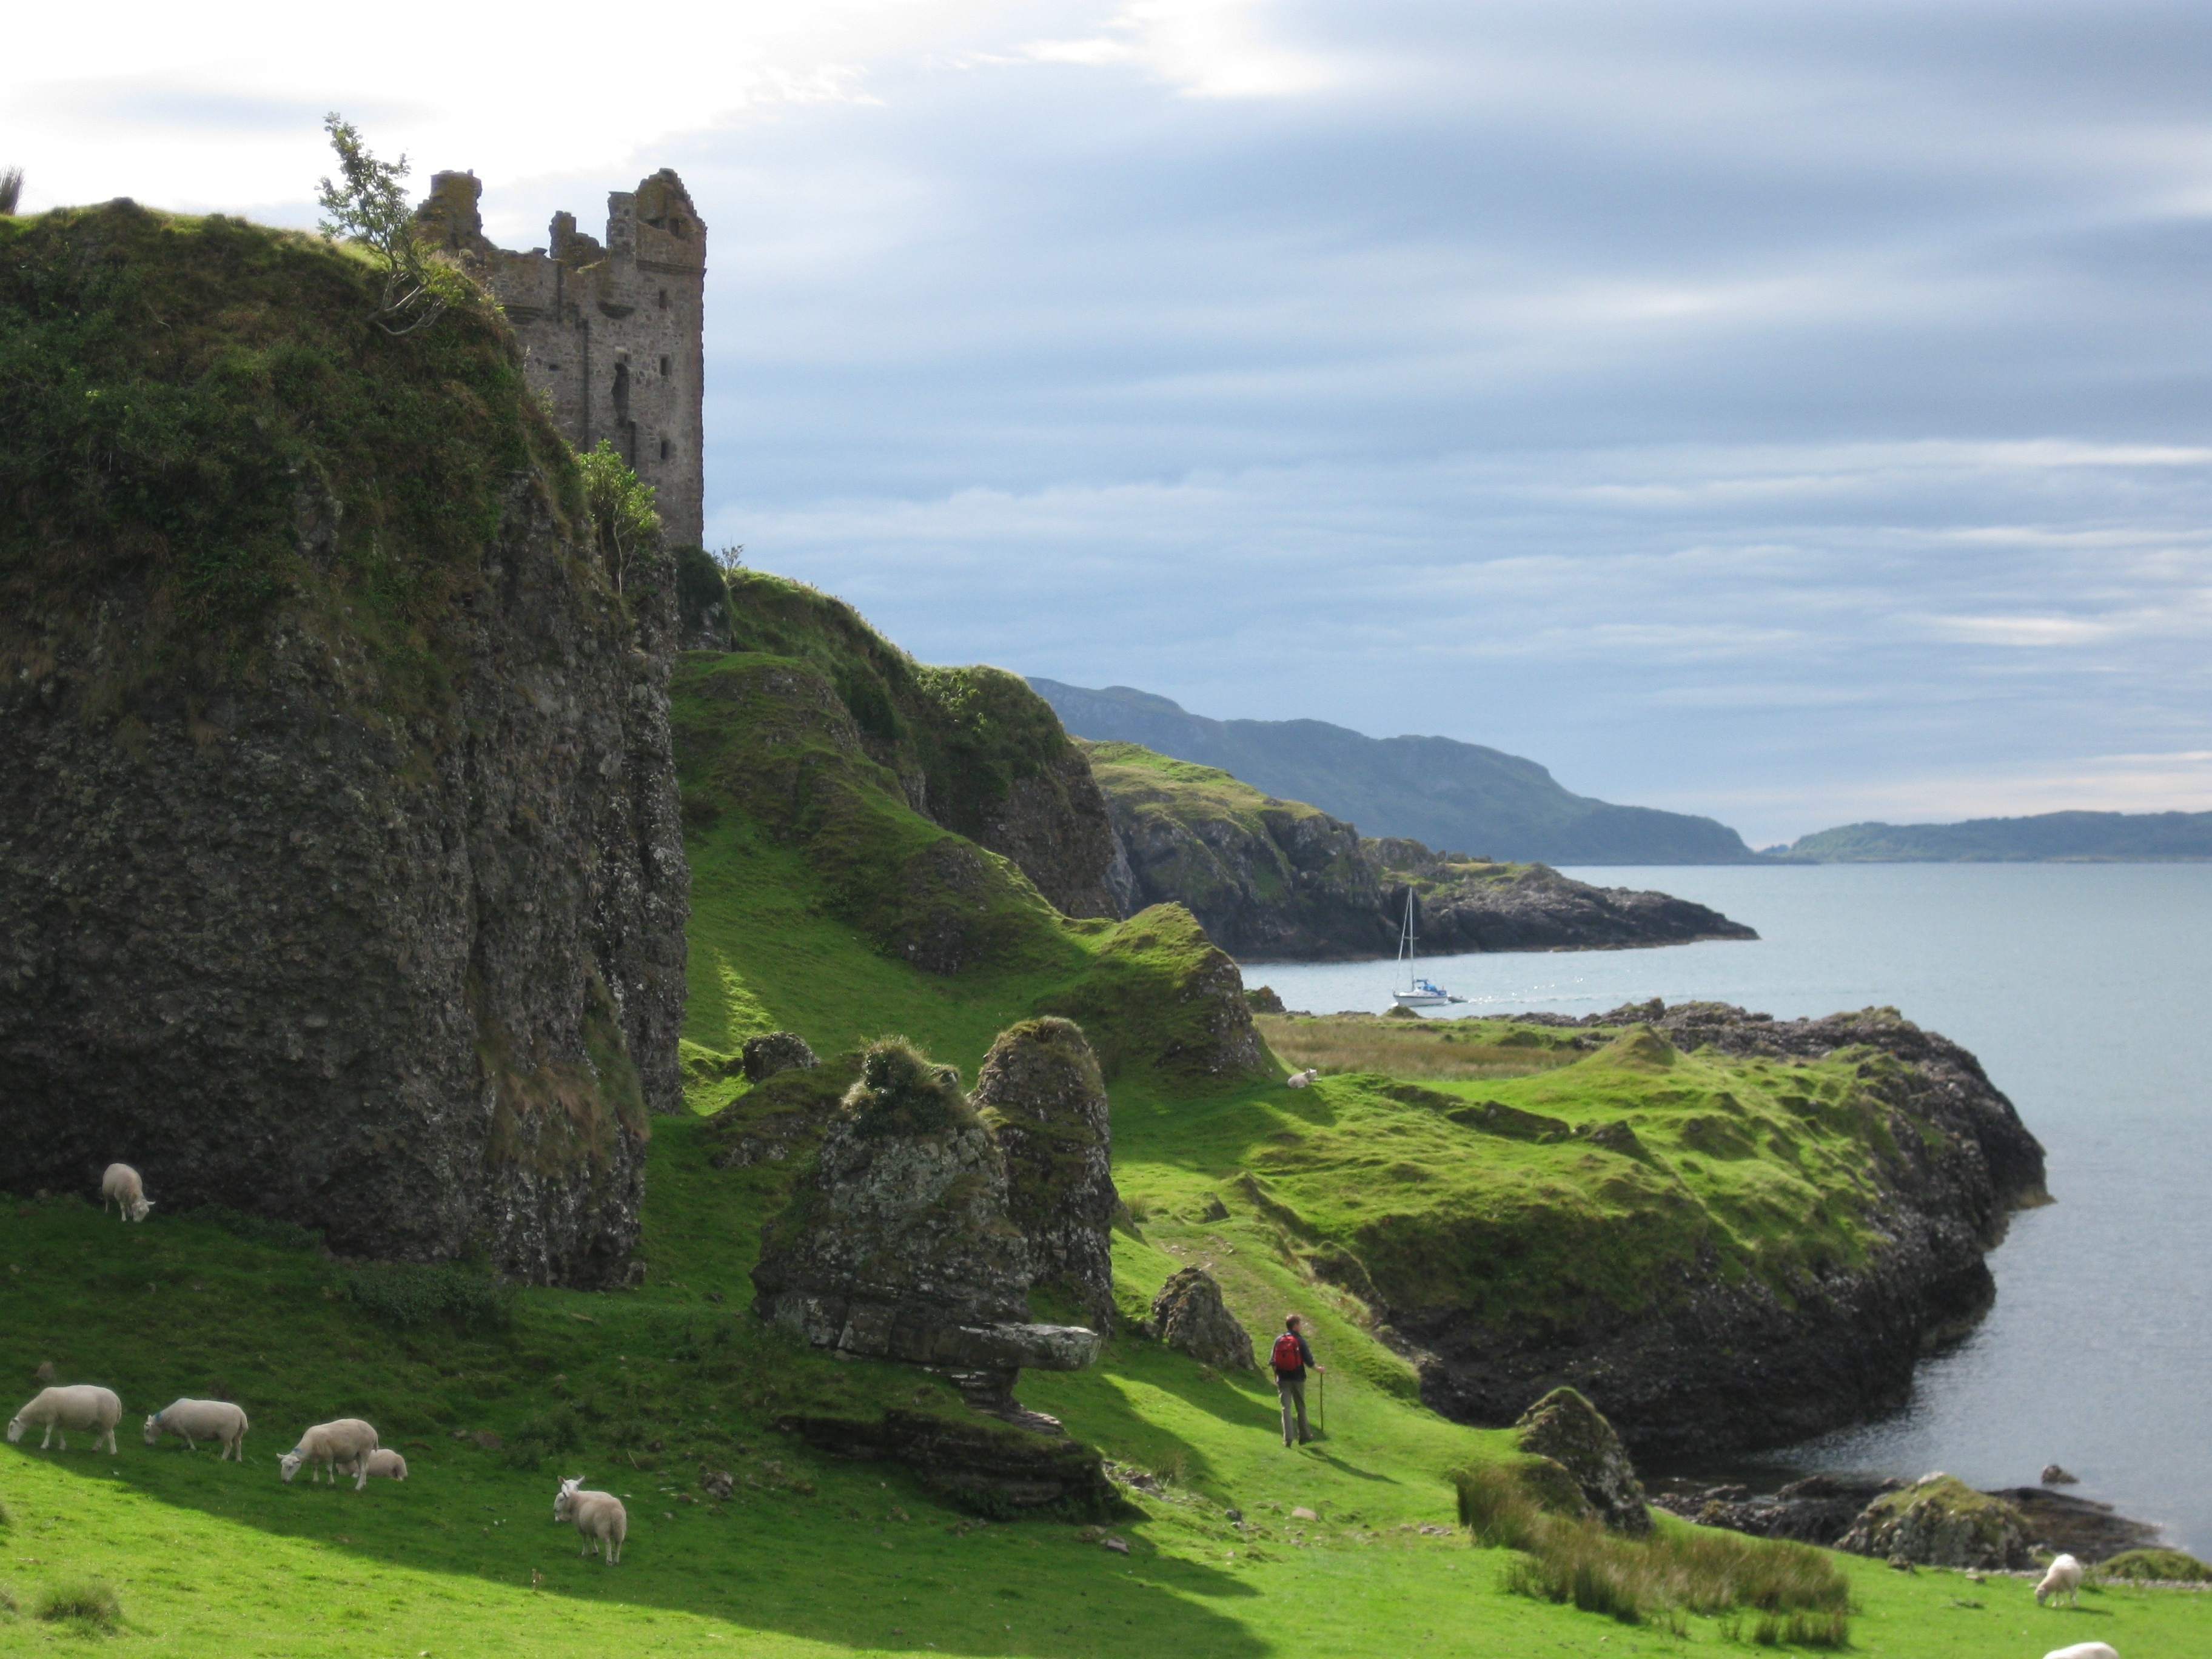 Gylen Castle Gylen Castle lies at the south end of the island of Kerrera, Oban, Argyll. Originally a stronghold of the MacDougalls, the castle was strategically placed to command the southern approaches to Oban by the narrow Sound of Kerrera.